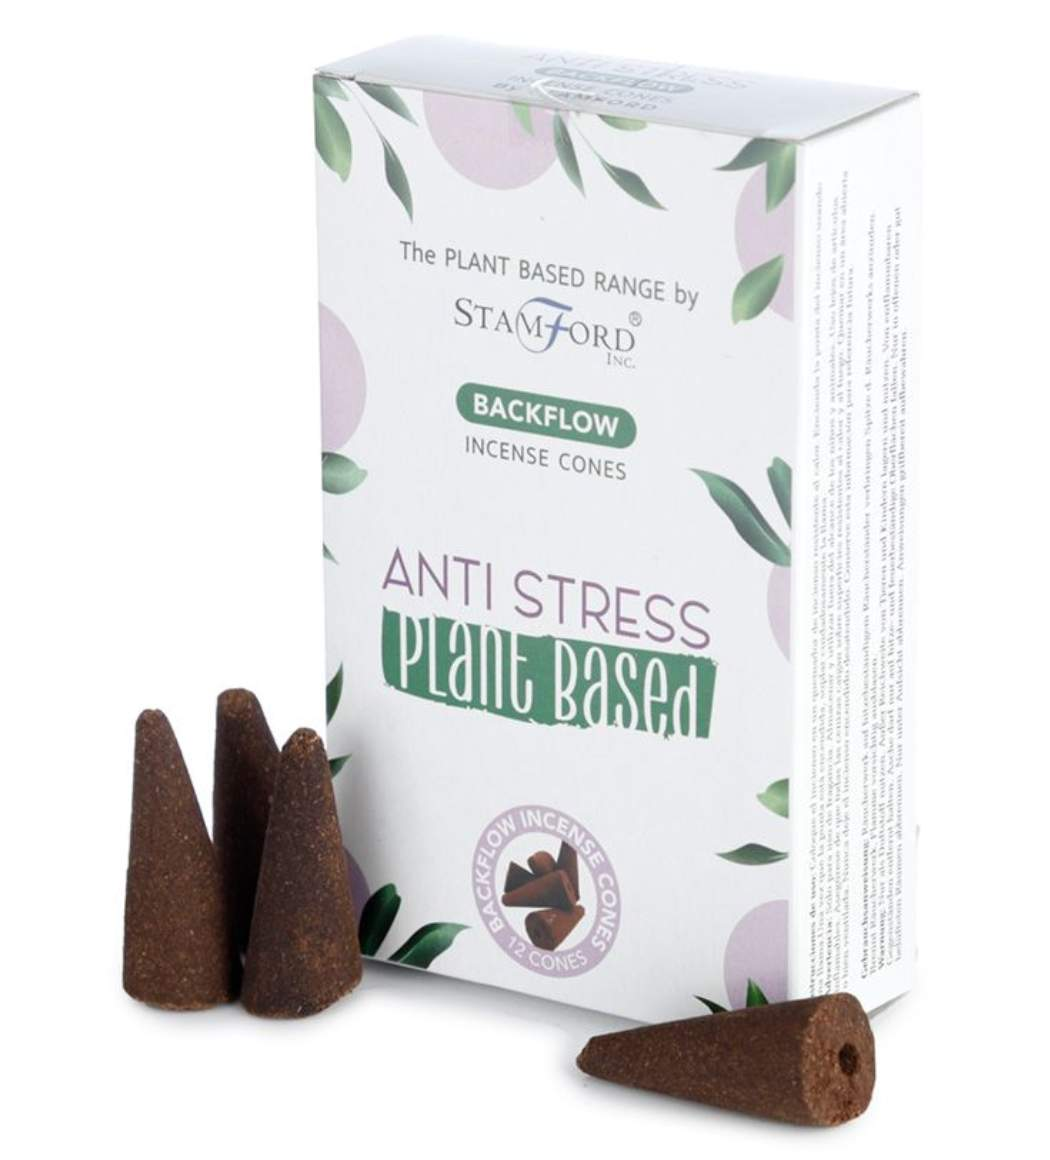 Anti Stress Backflow Incense Cones-FREE Shipping over £35.00-